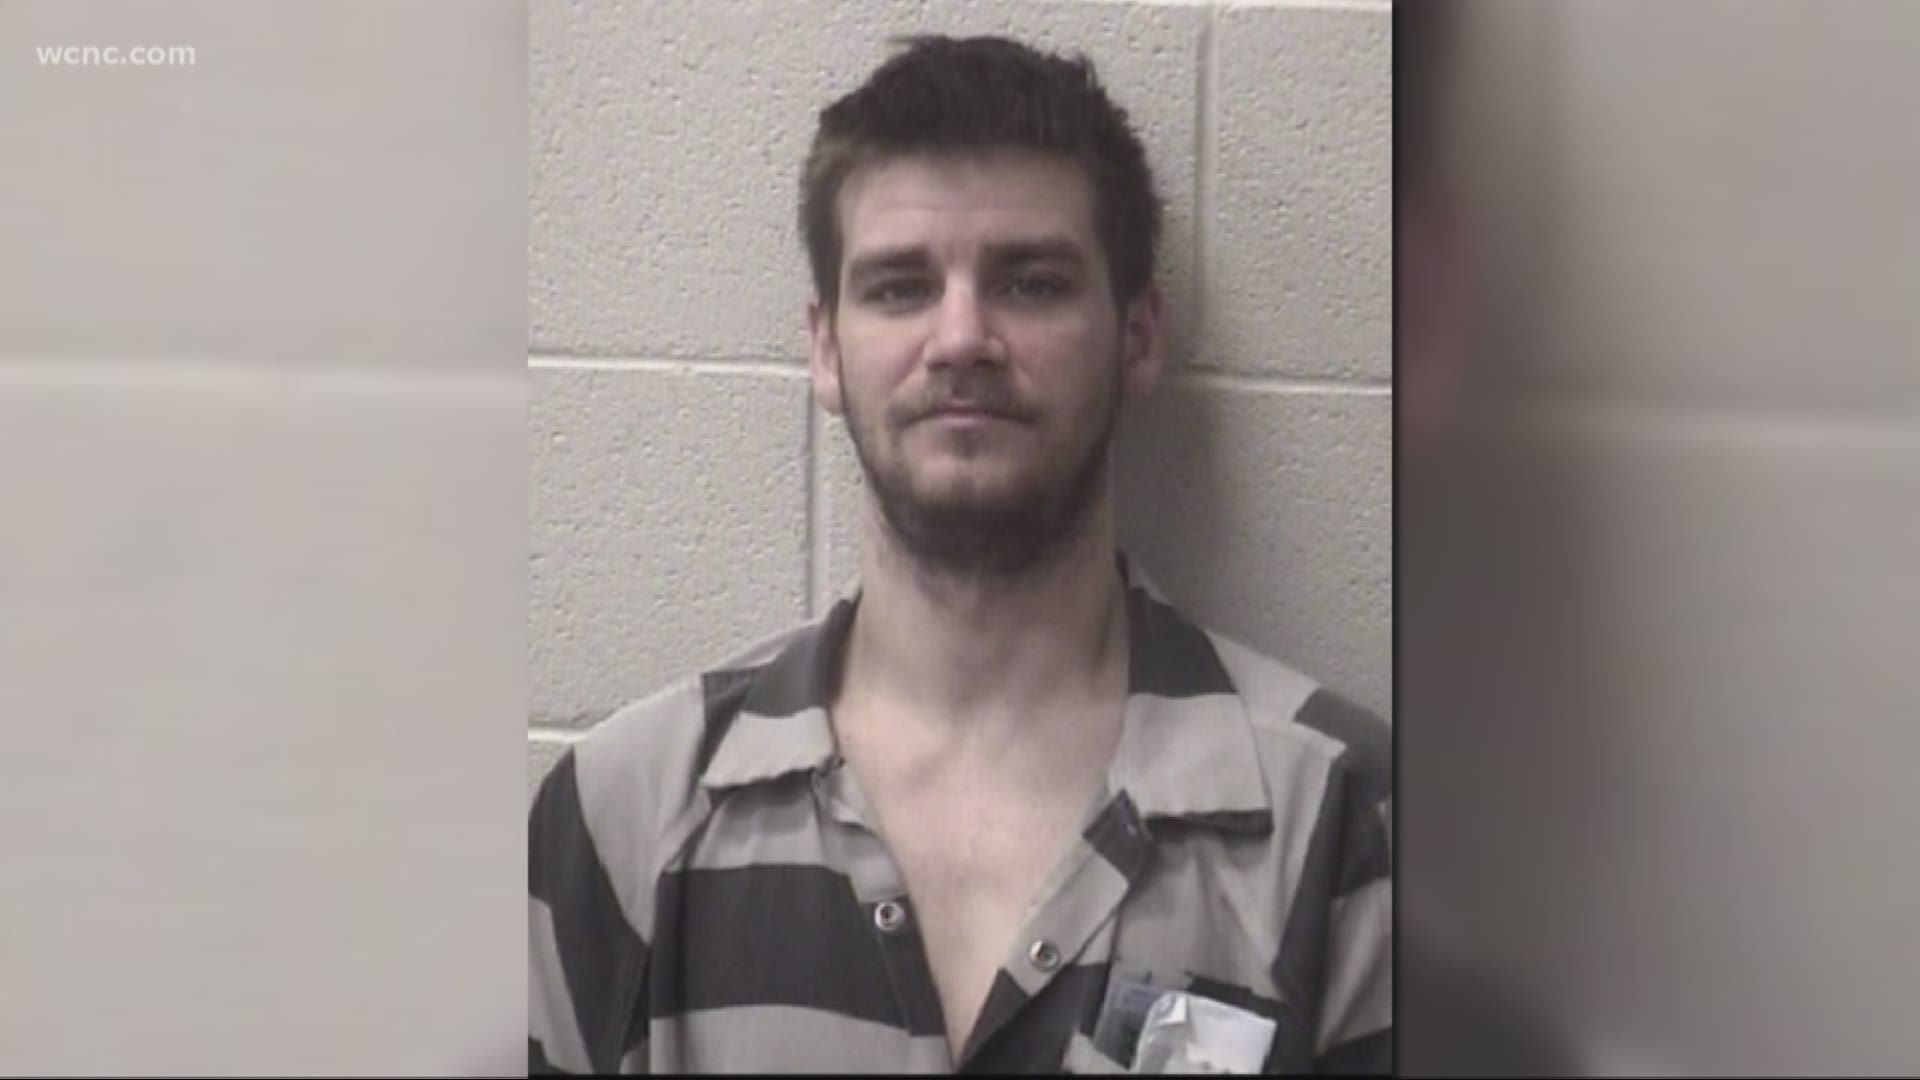 Authorities said Jason Mullen of Statesville escaped while taking out the trash.